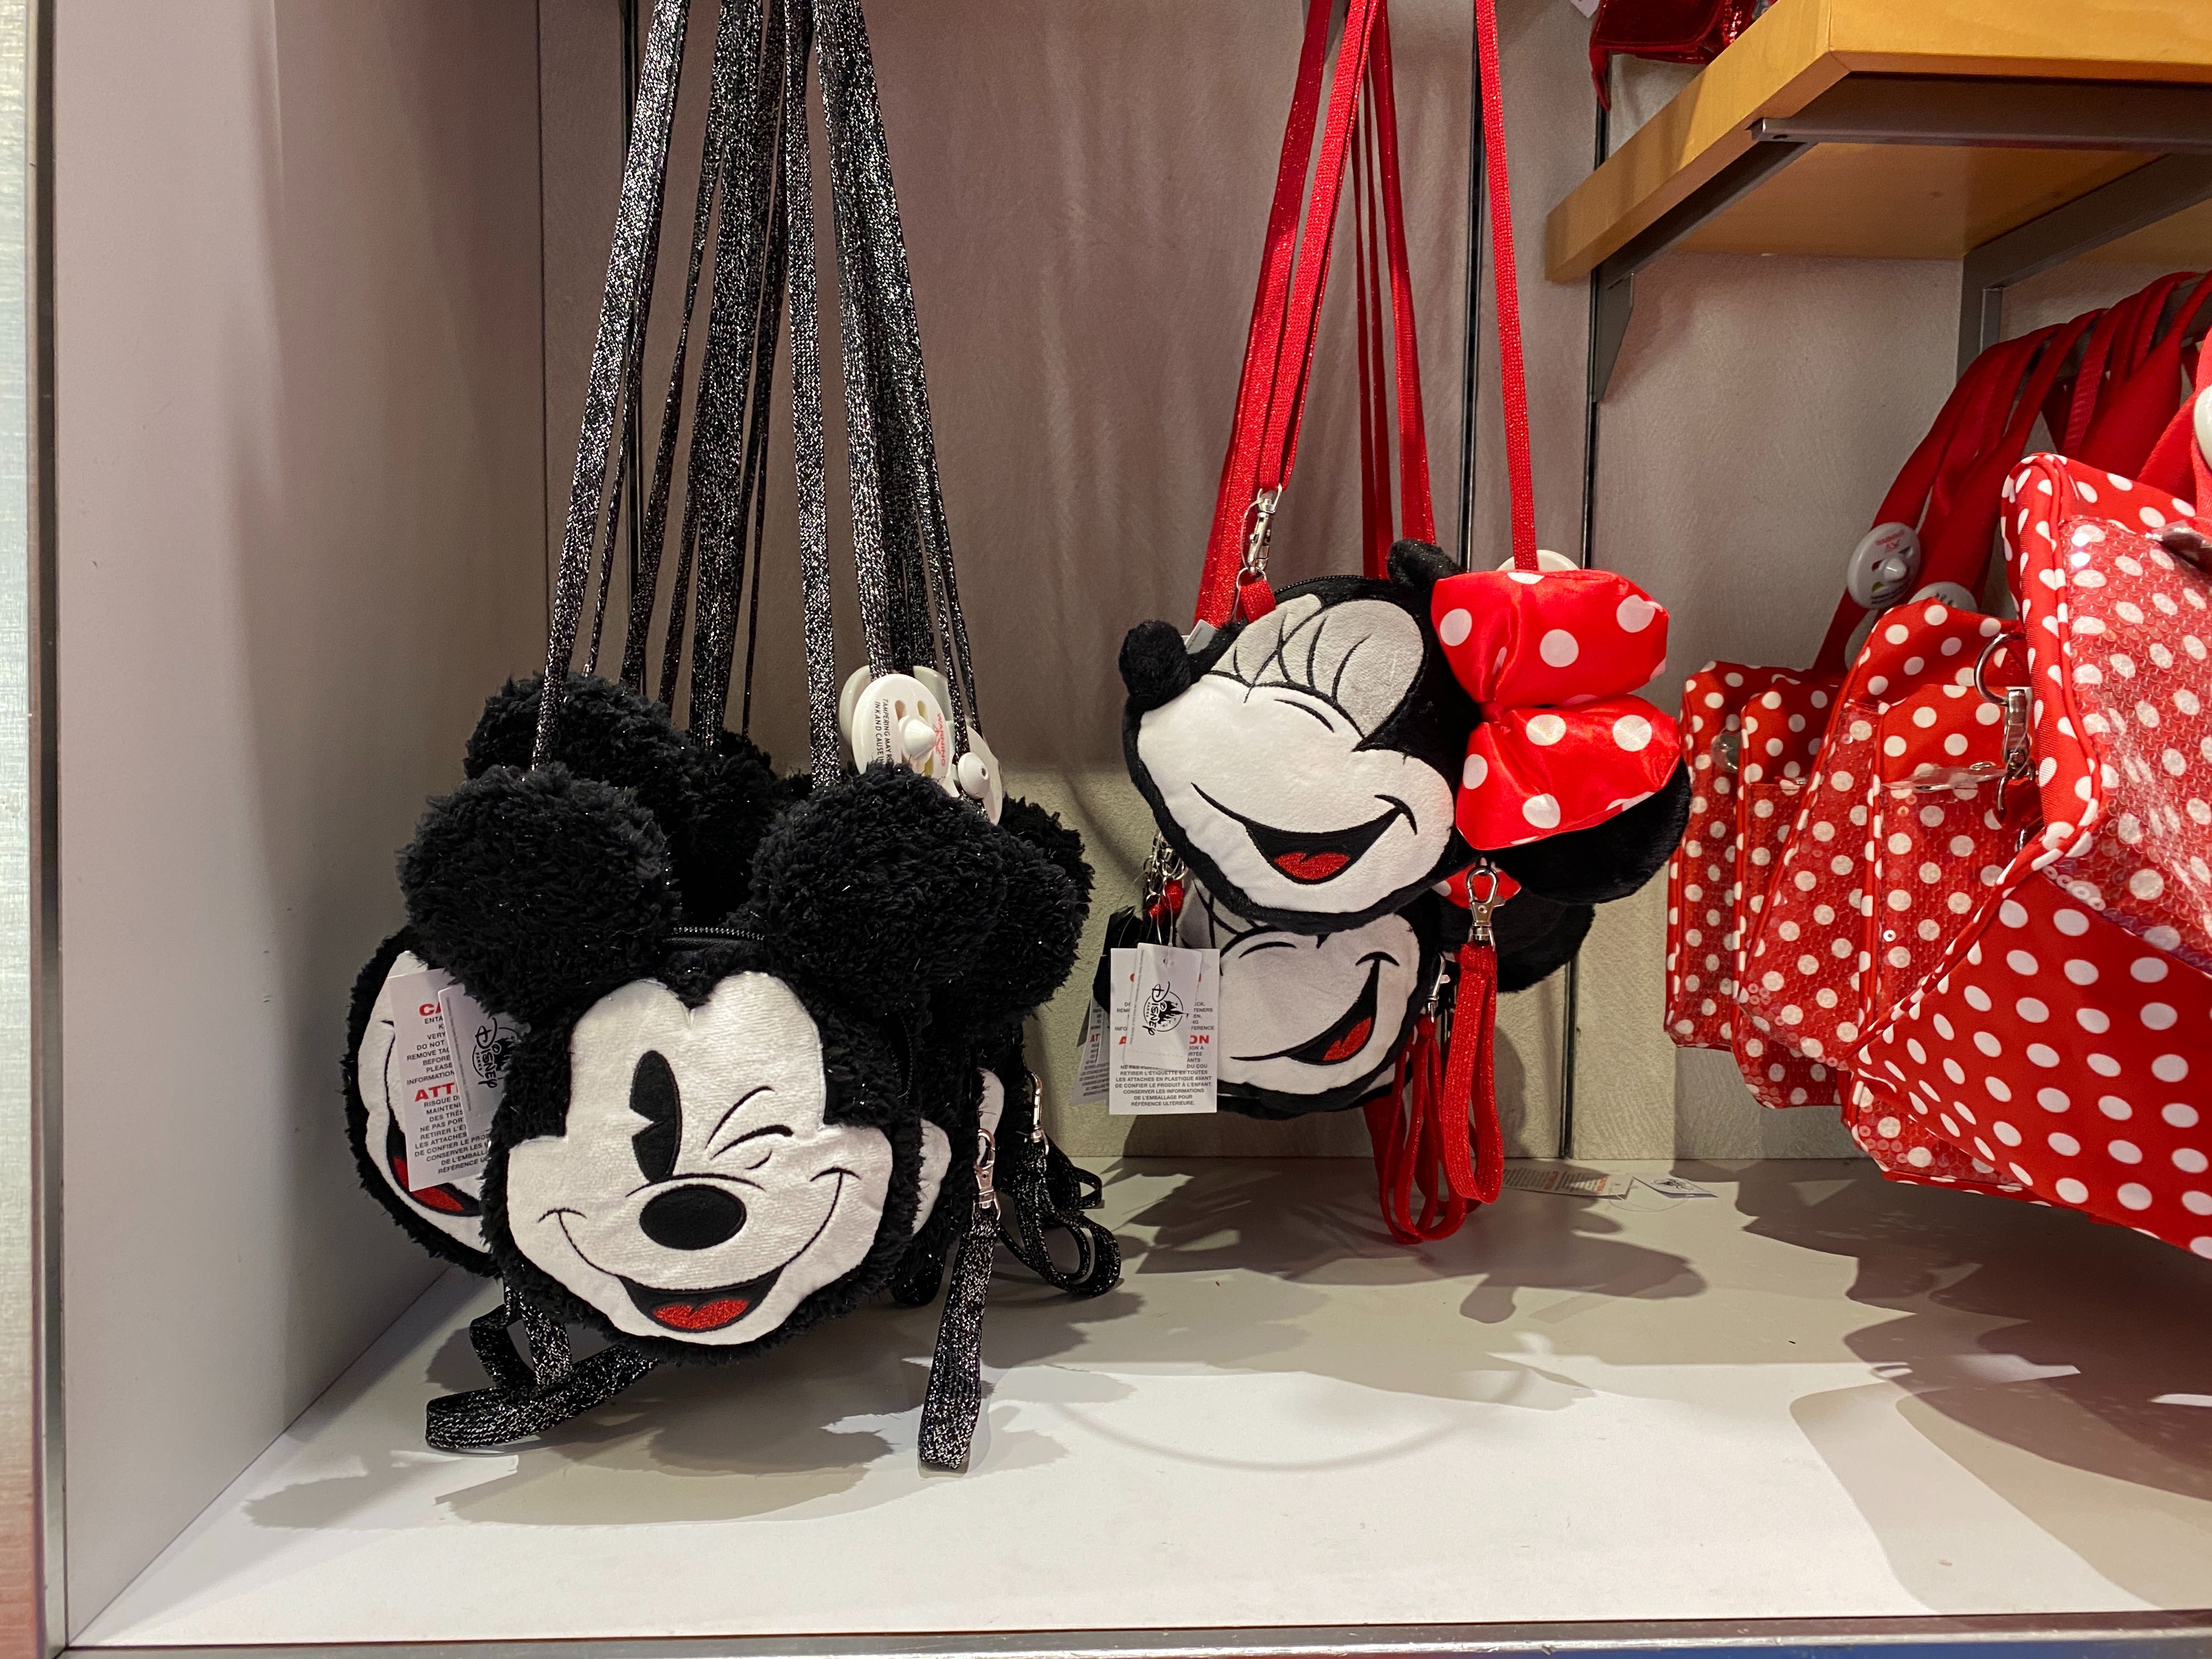 PHOTOS: Snuggle Up With These NEW Mickey & Minnie Mouse Plush Purses at  Walt Disney World - WDW News Today